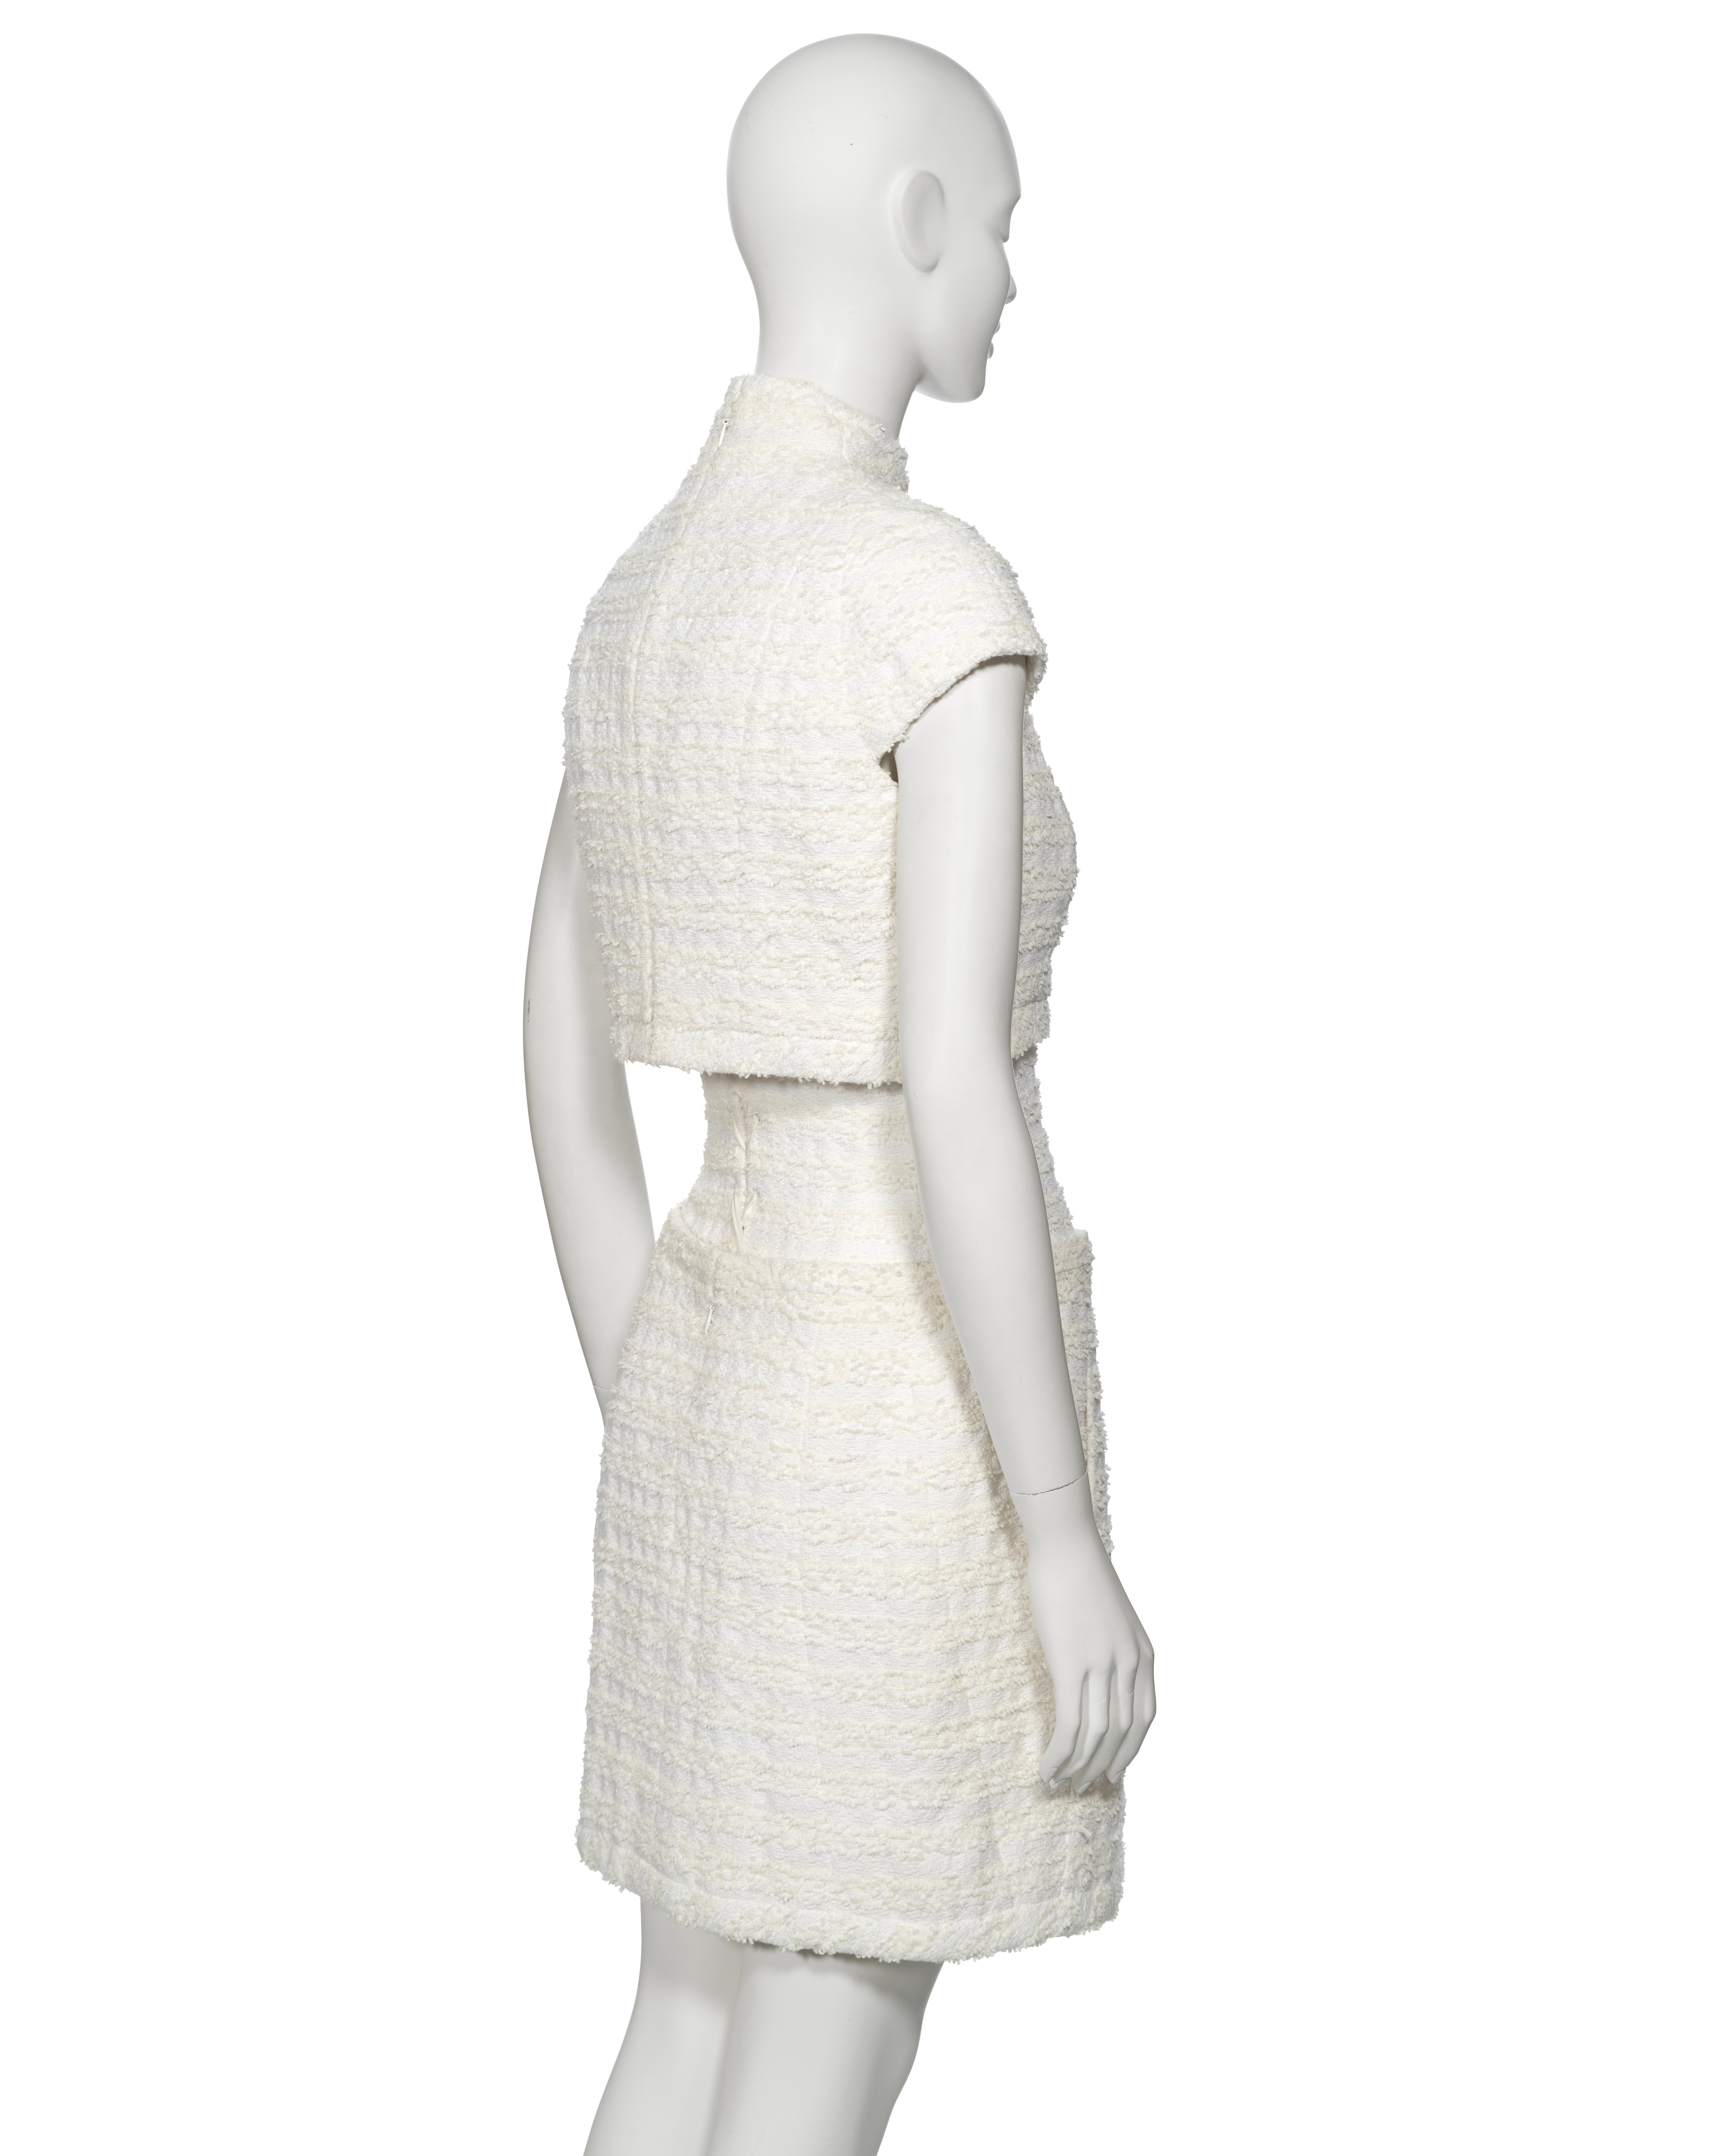 Chanel by Karl Lagerfeld Haute Couture White Bouclé Corseted Skirt Suit, ss 2014 For Sale 5